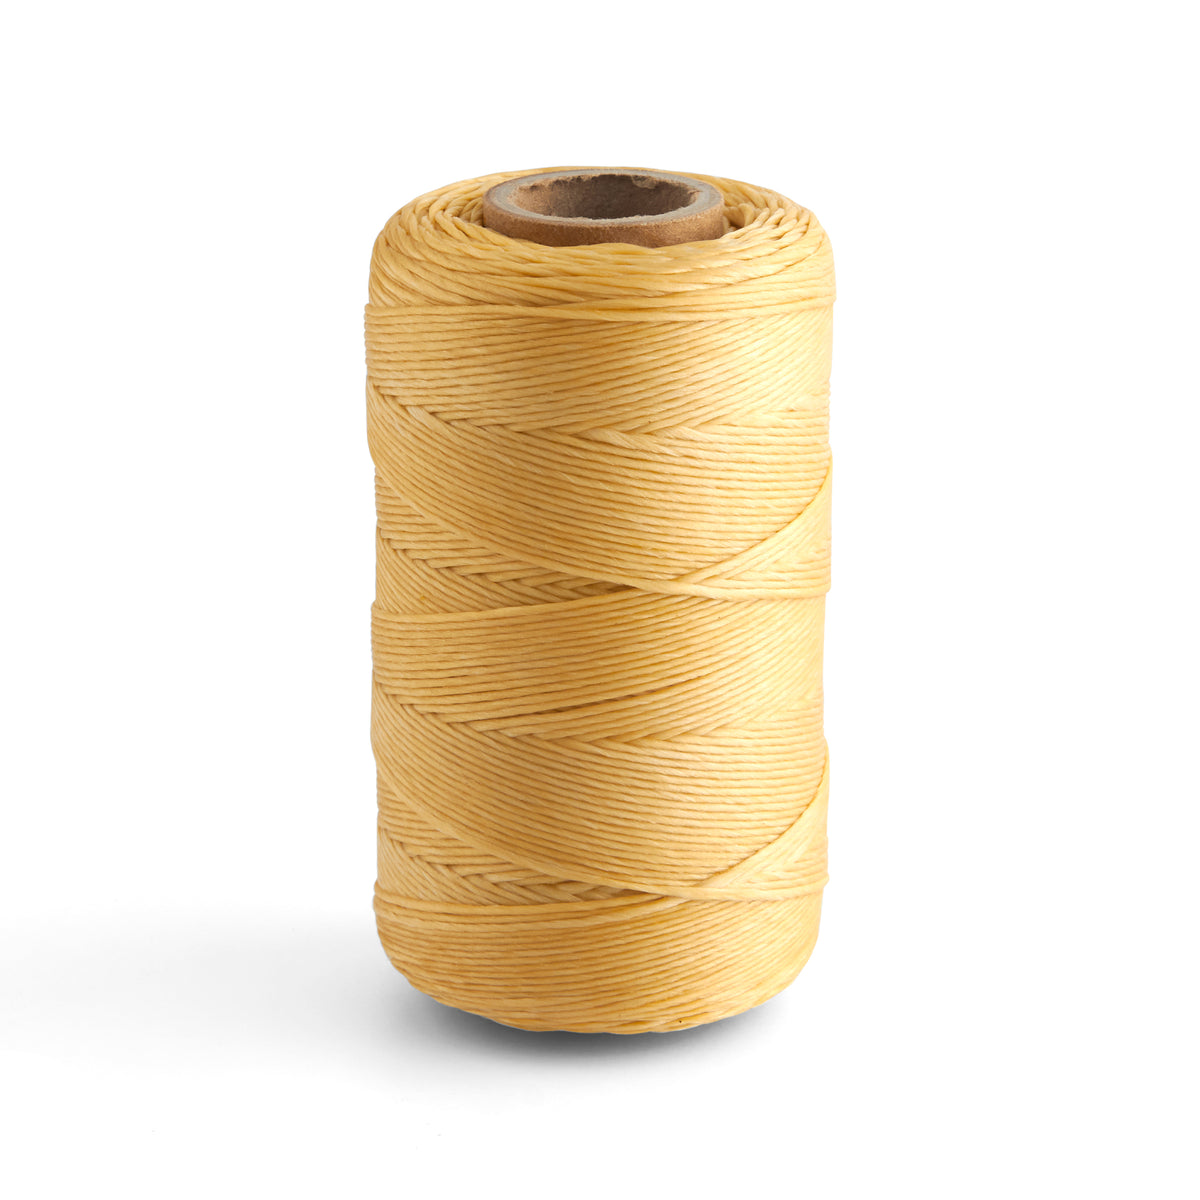 Imitation Sinew: 7-Ply: Round: Polyester: 4 oz: Natural